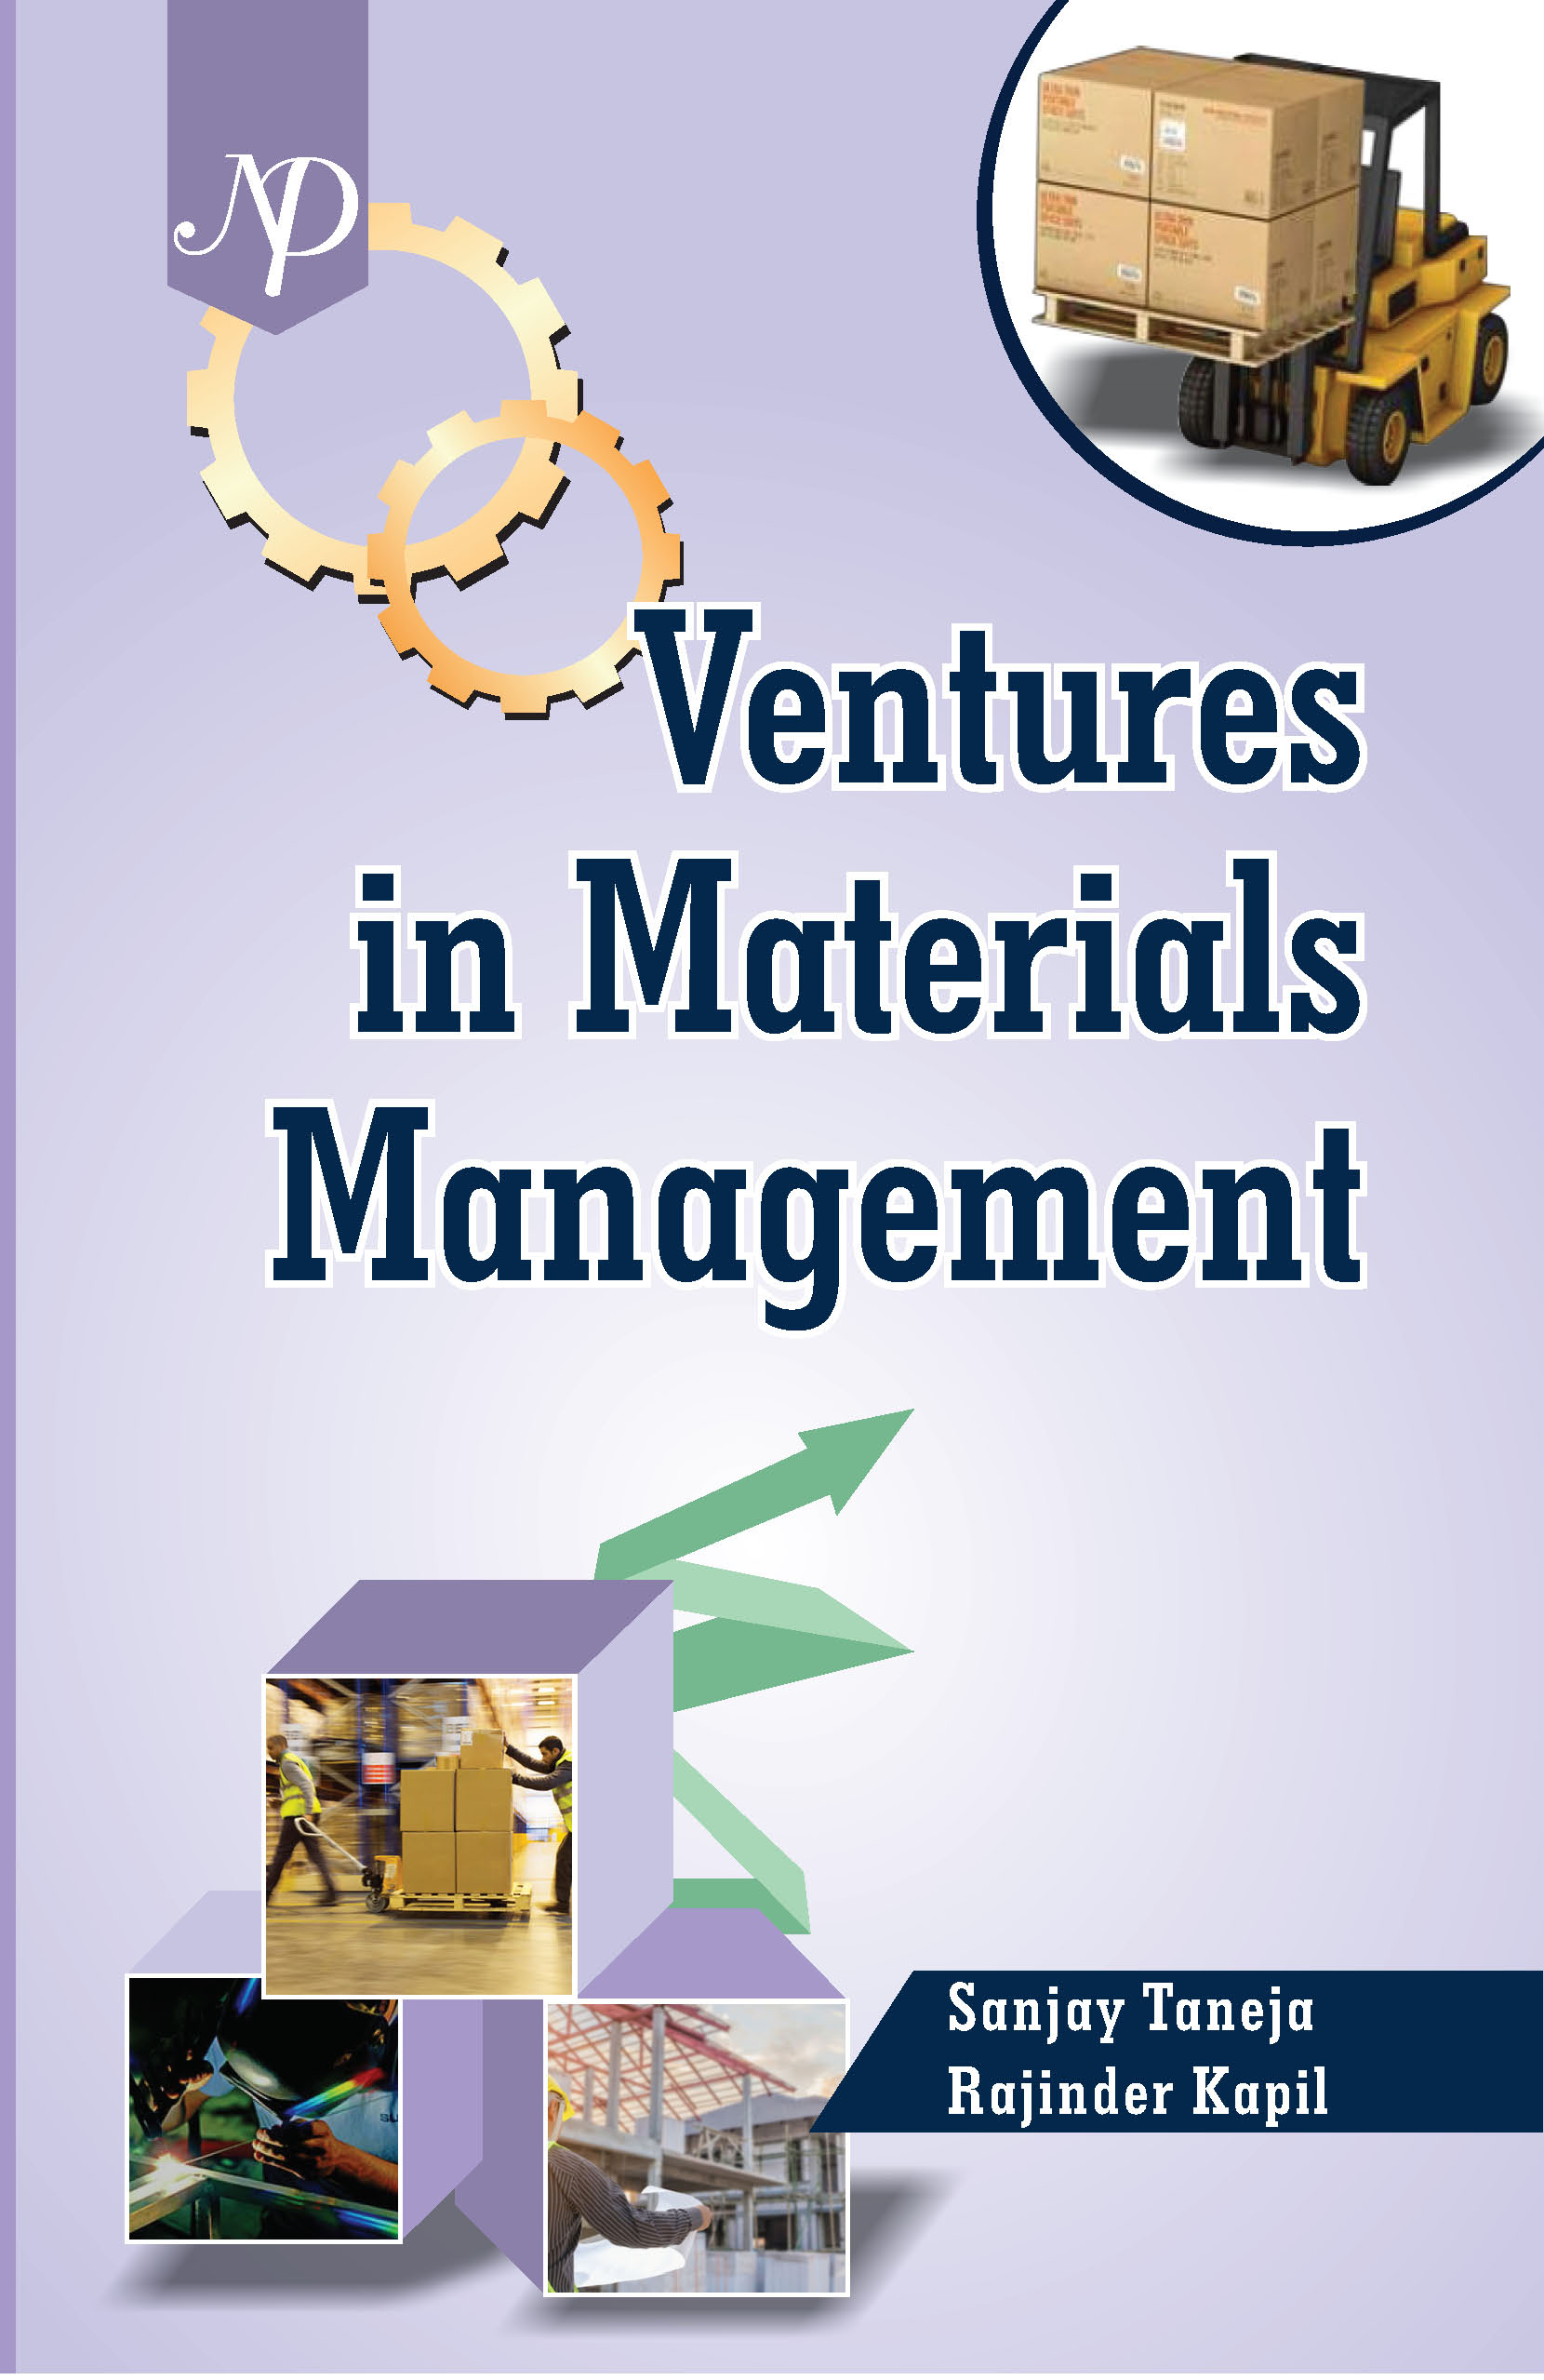 Venture in Material Management By Sanjay Taneja Cover.jpg